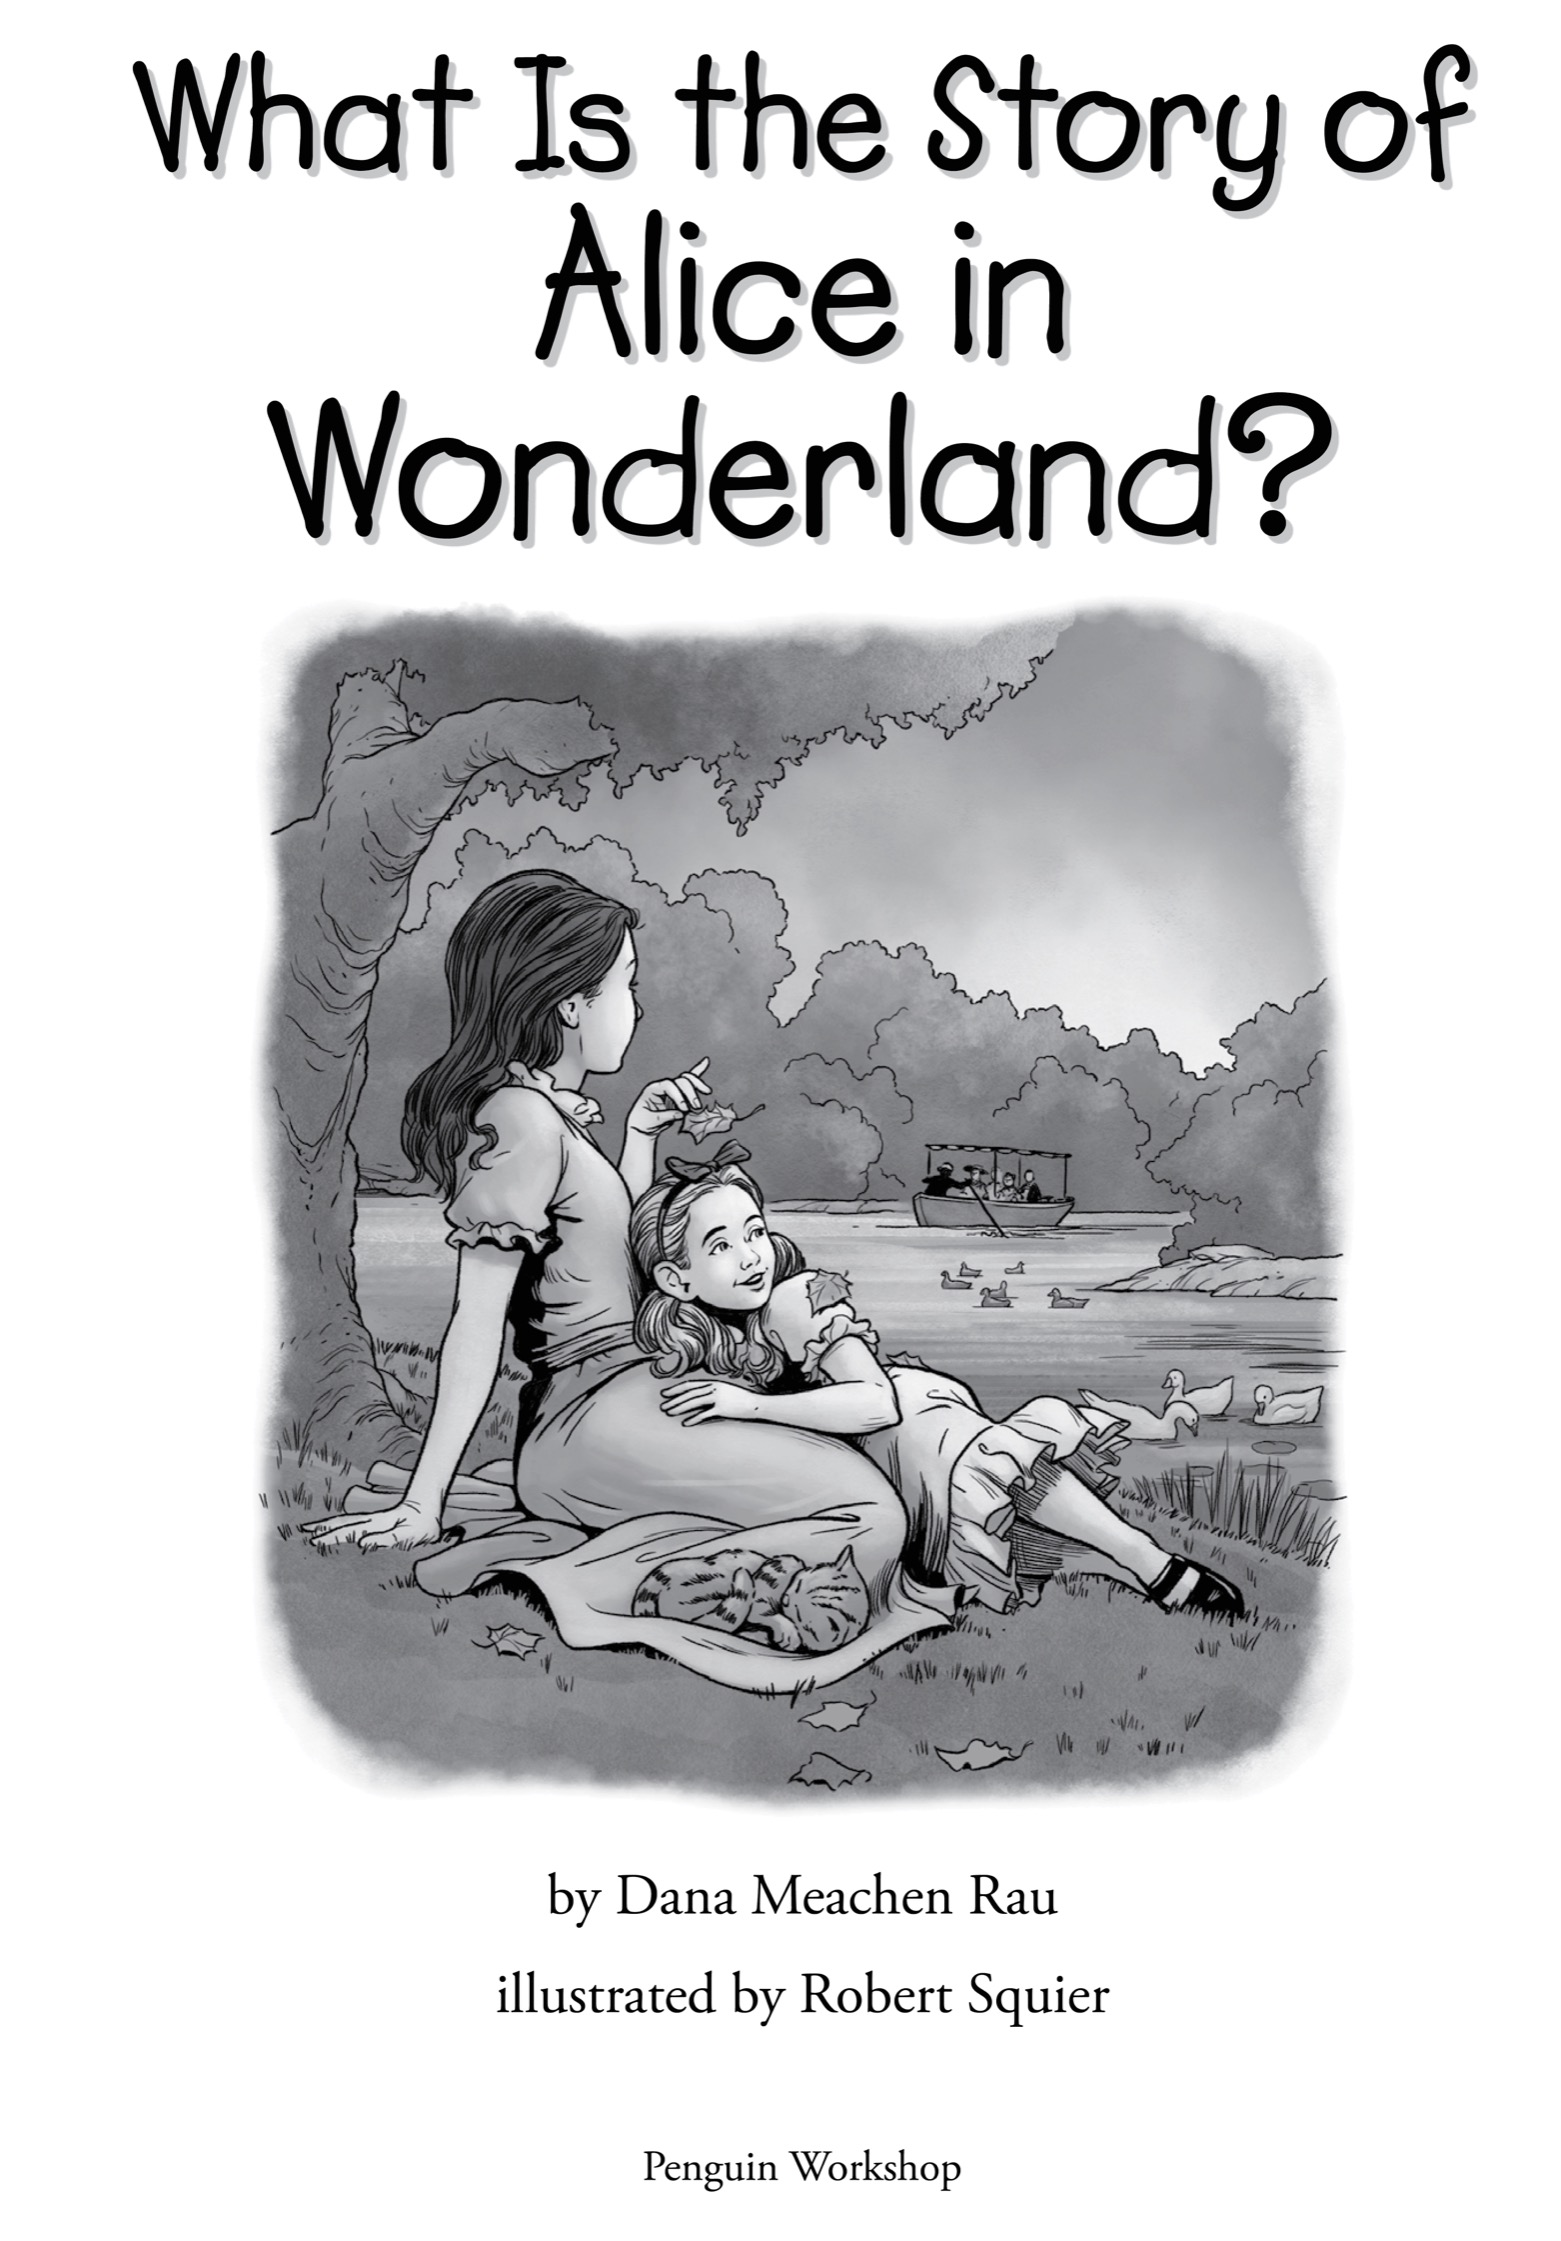 Book title, What Is the Story of Alice in Wonderland?, author, Dana M. Rau, imprint, Penguin Workshop